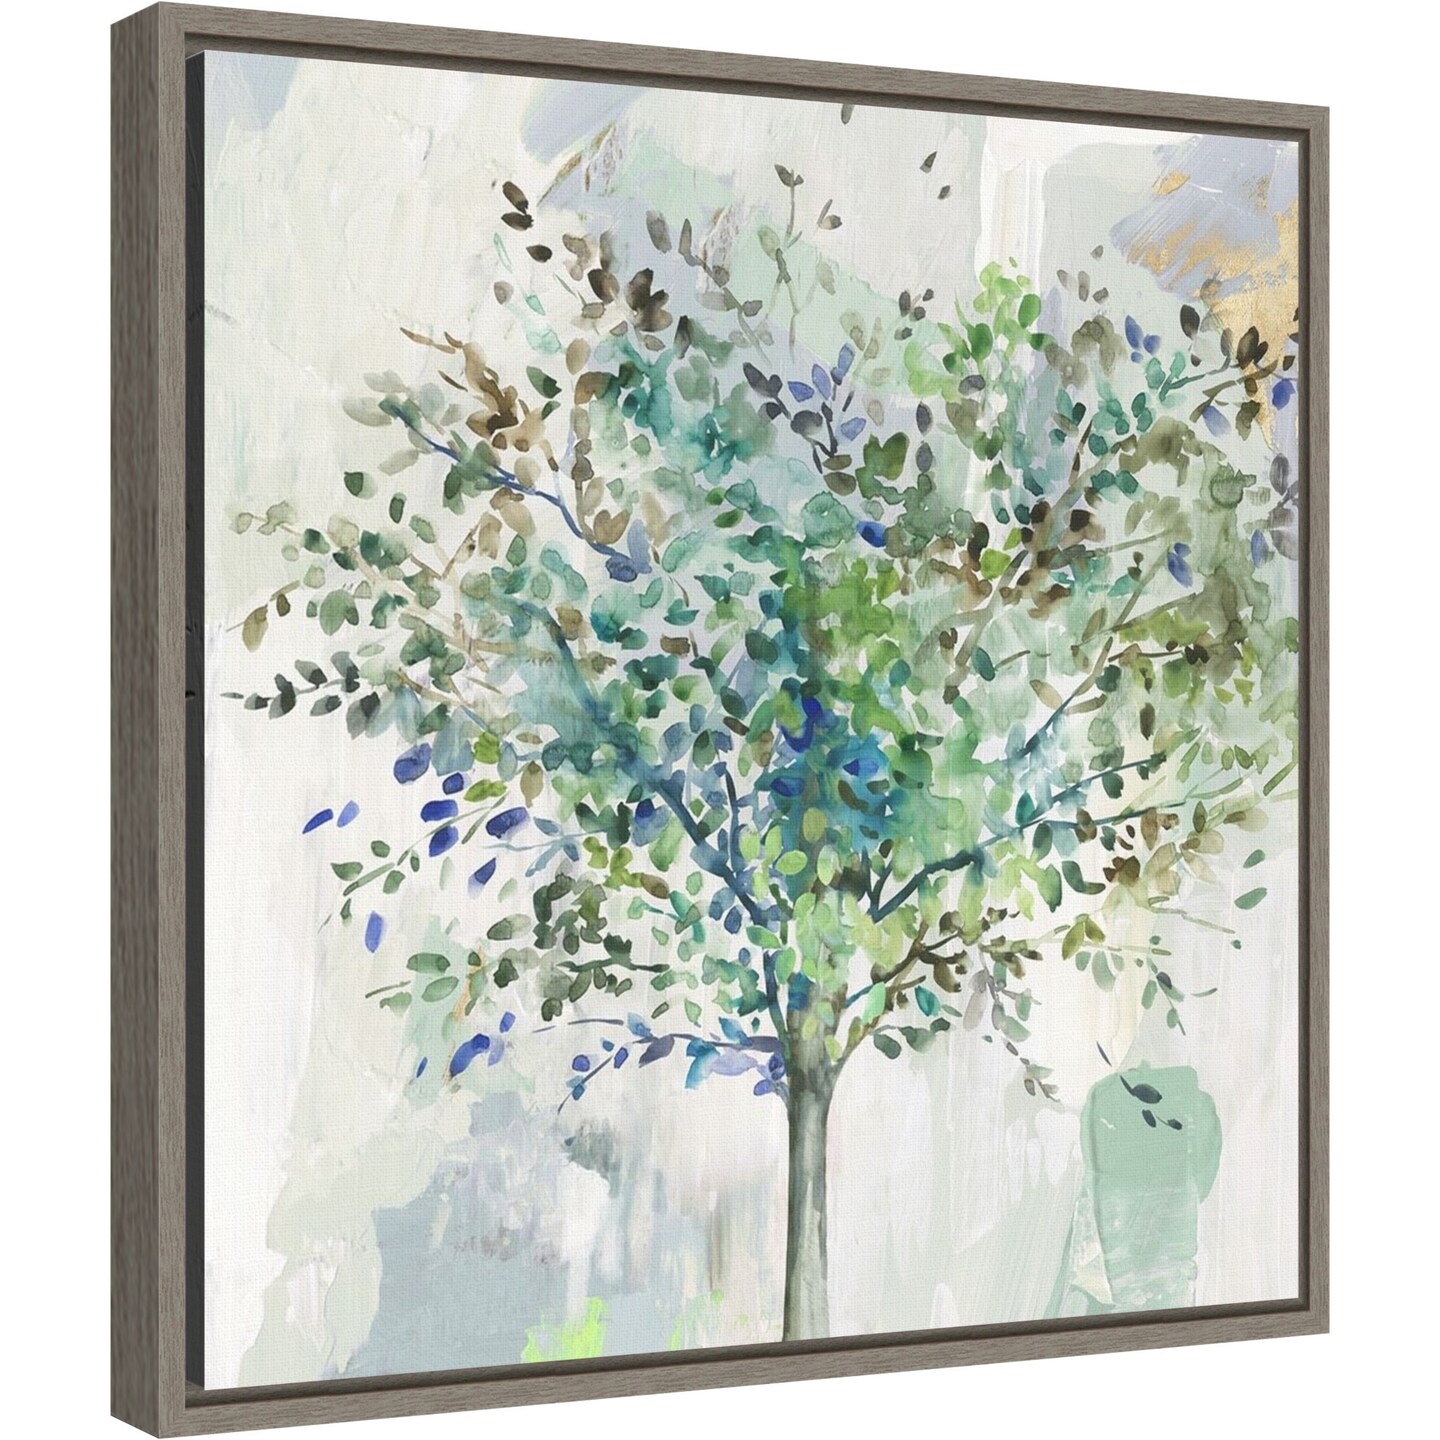 Glorious Still Moment (Green Tree) by Allison Pearce 16-in. W x 16-in. H. Canvas Wall Art Print Framed in Grey